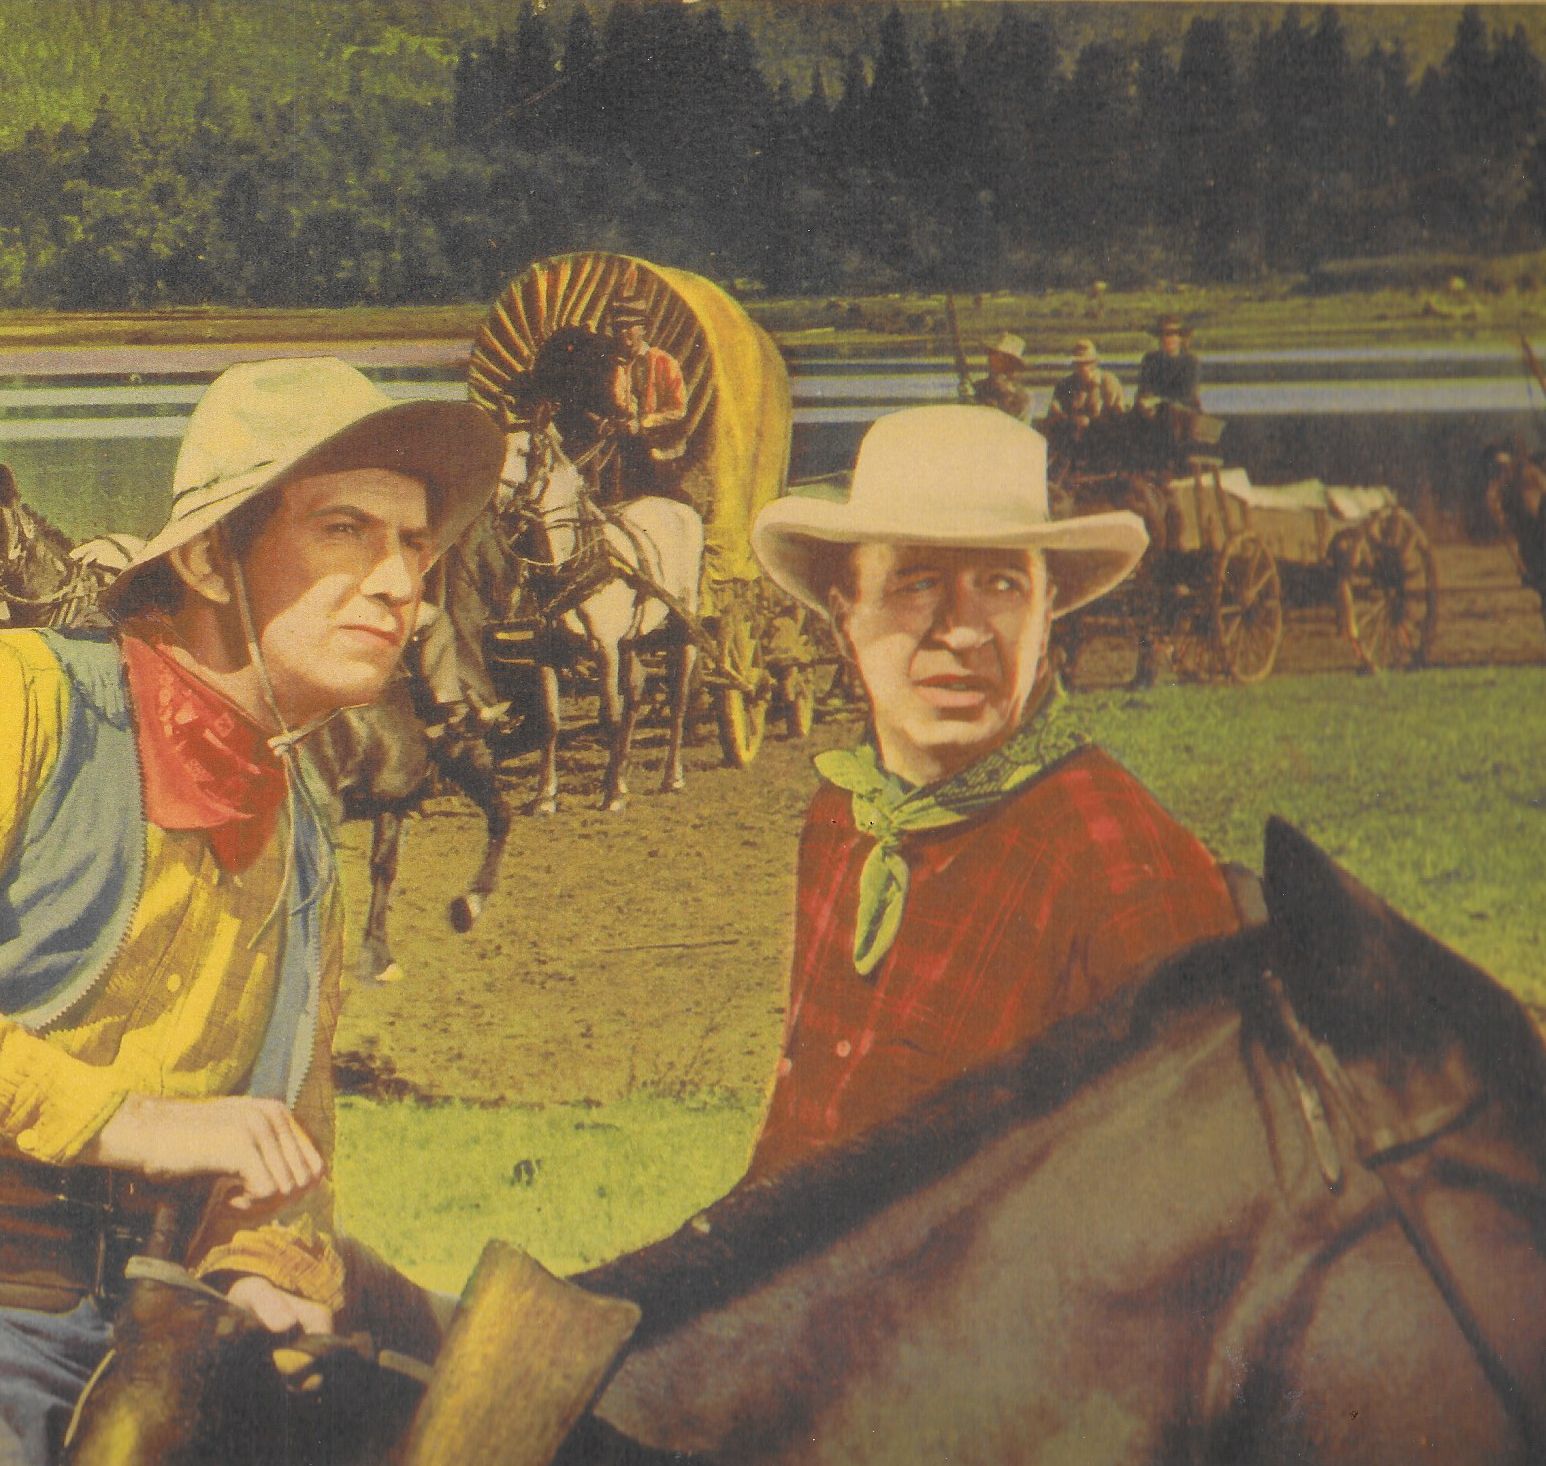 Courage of the West (1937) Screenshot 3 